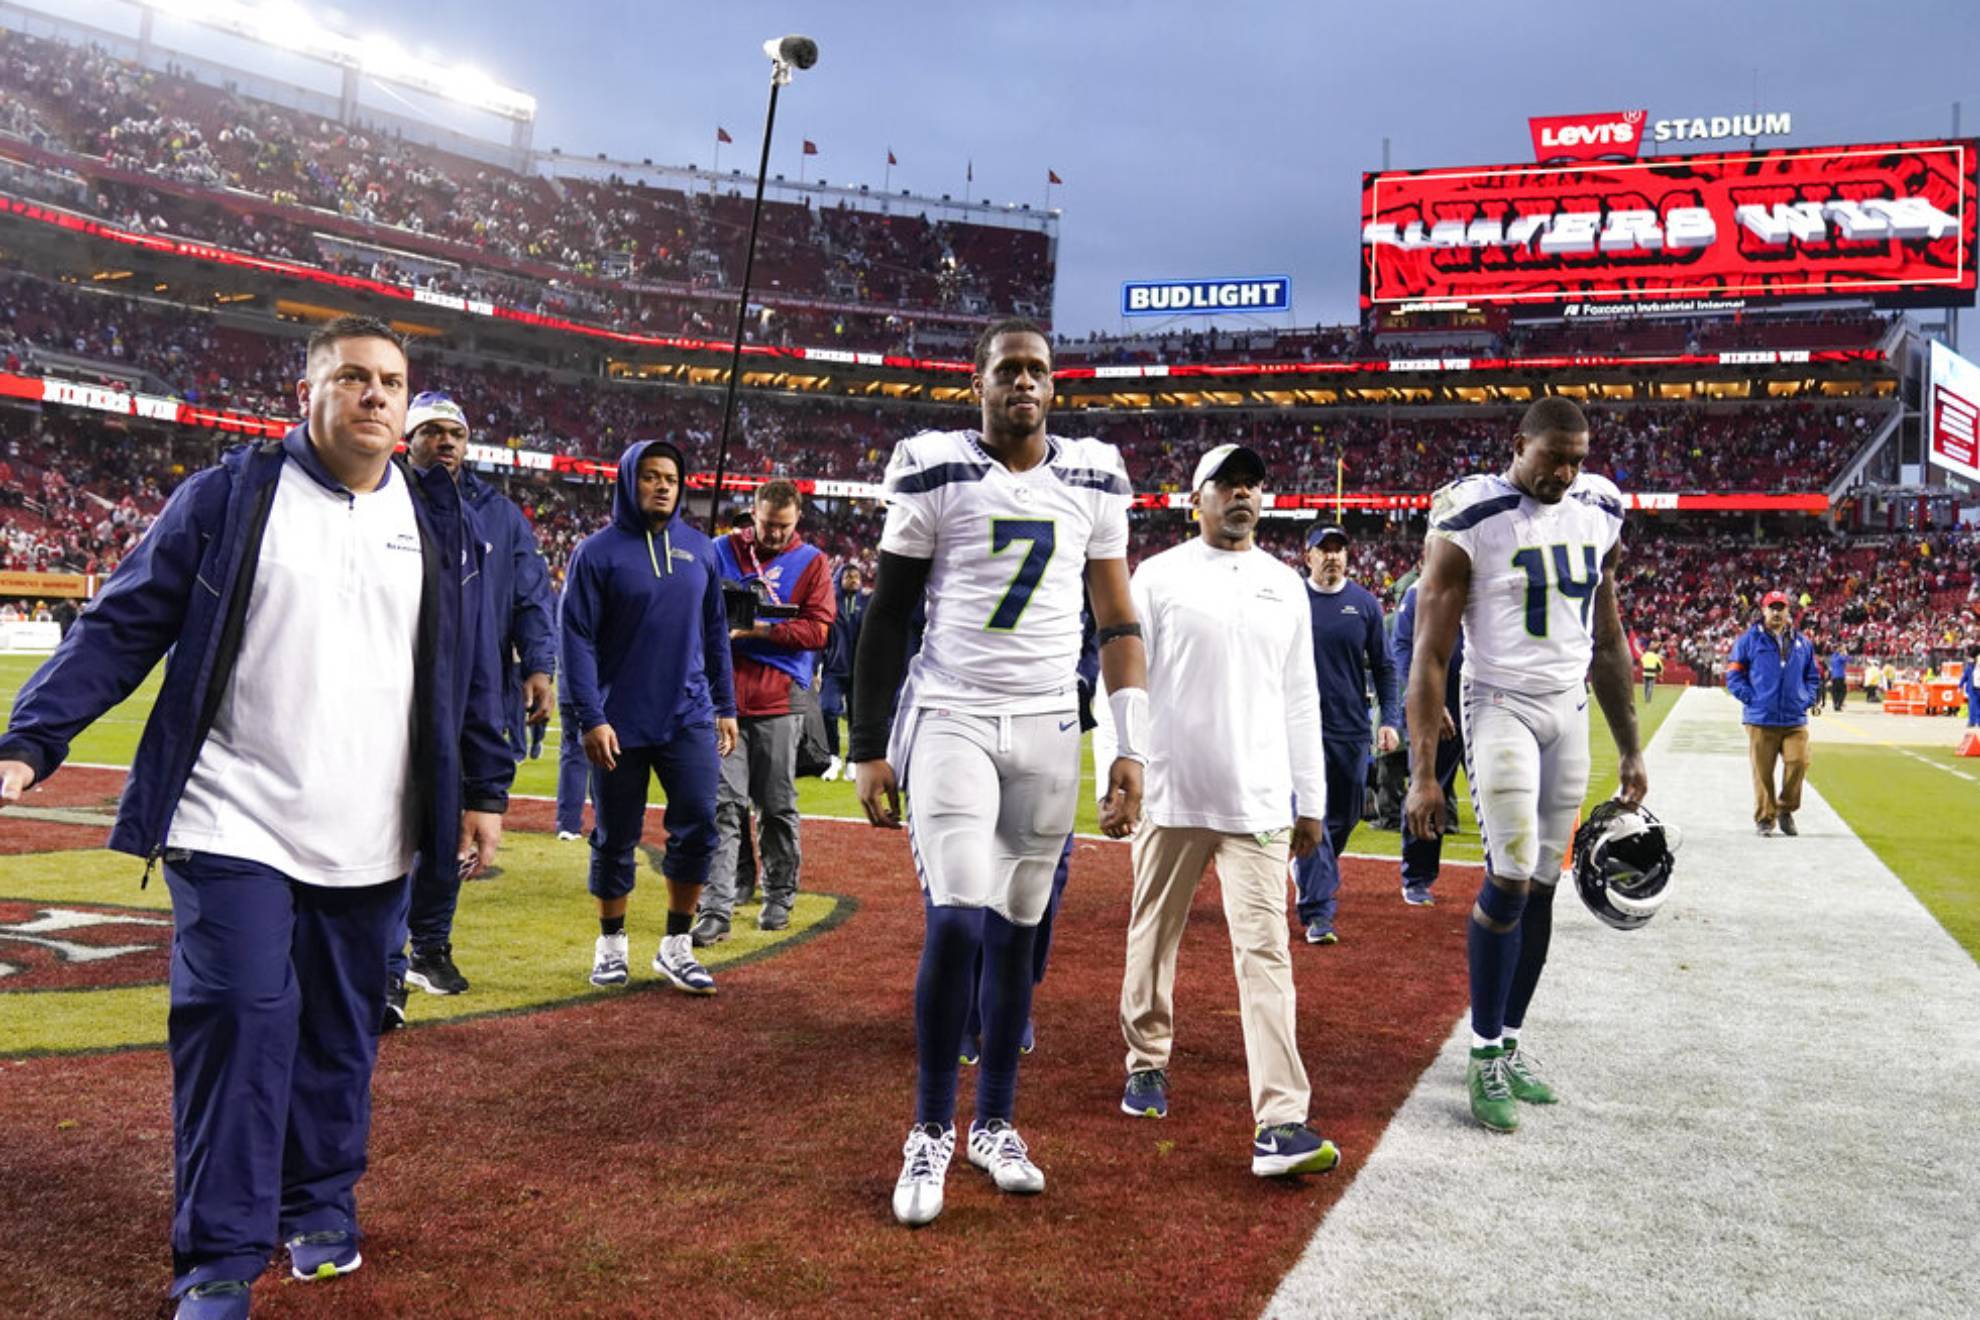 Seattle Seahawks quarterback Geno Smith (7) and wide receiver DK Metcalf (14) walk off the field after an NFL wild card playoff football game against the San Francisco 49ers in Santa Clara, Calif., Saturday, Jan. 14, 2023. The 49ers won 41-23.